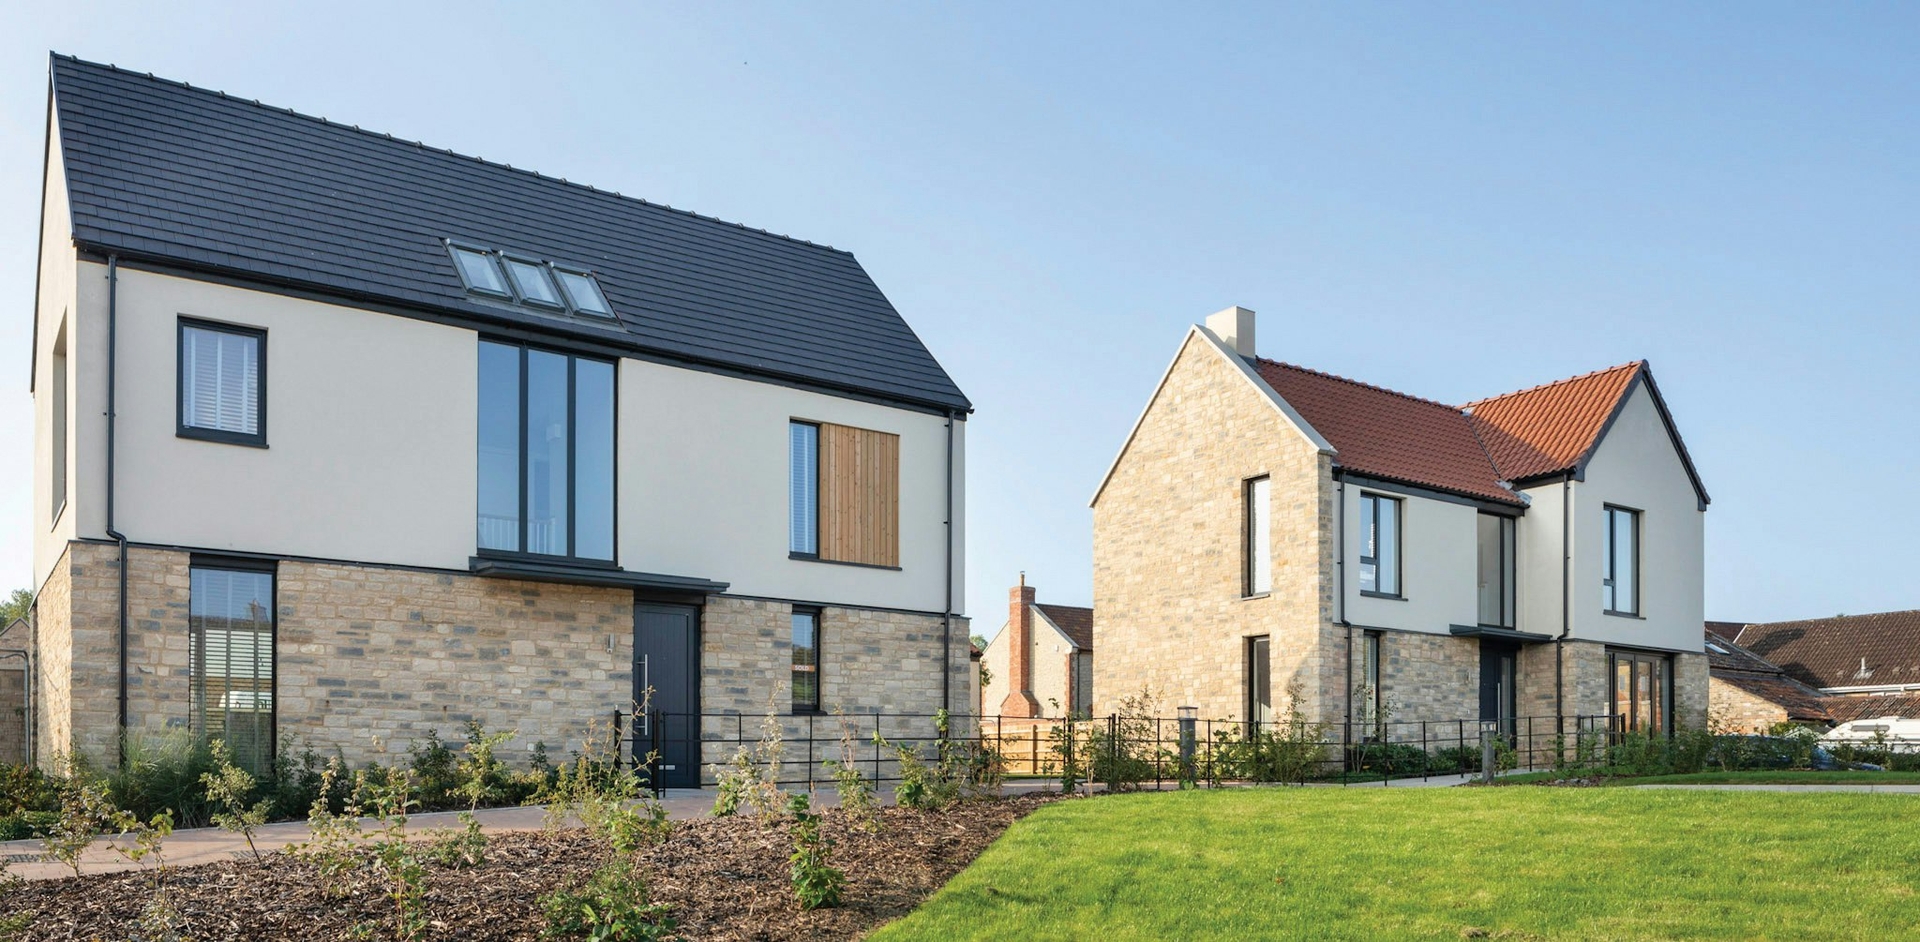 Cross Farm, Wedmore, a completed and sold property development by Acorn Property Invest